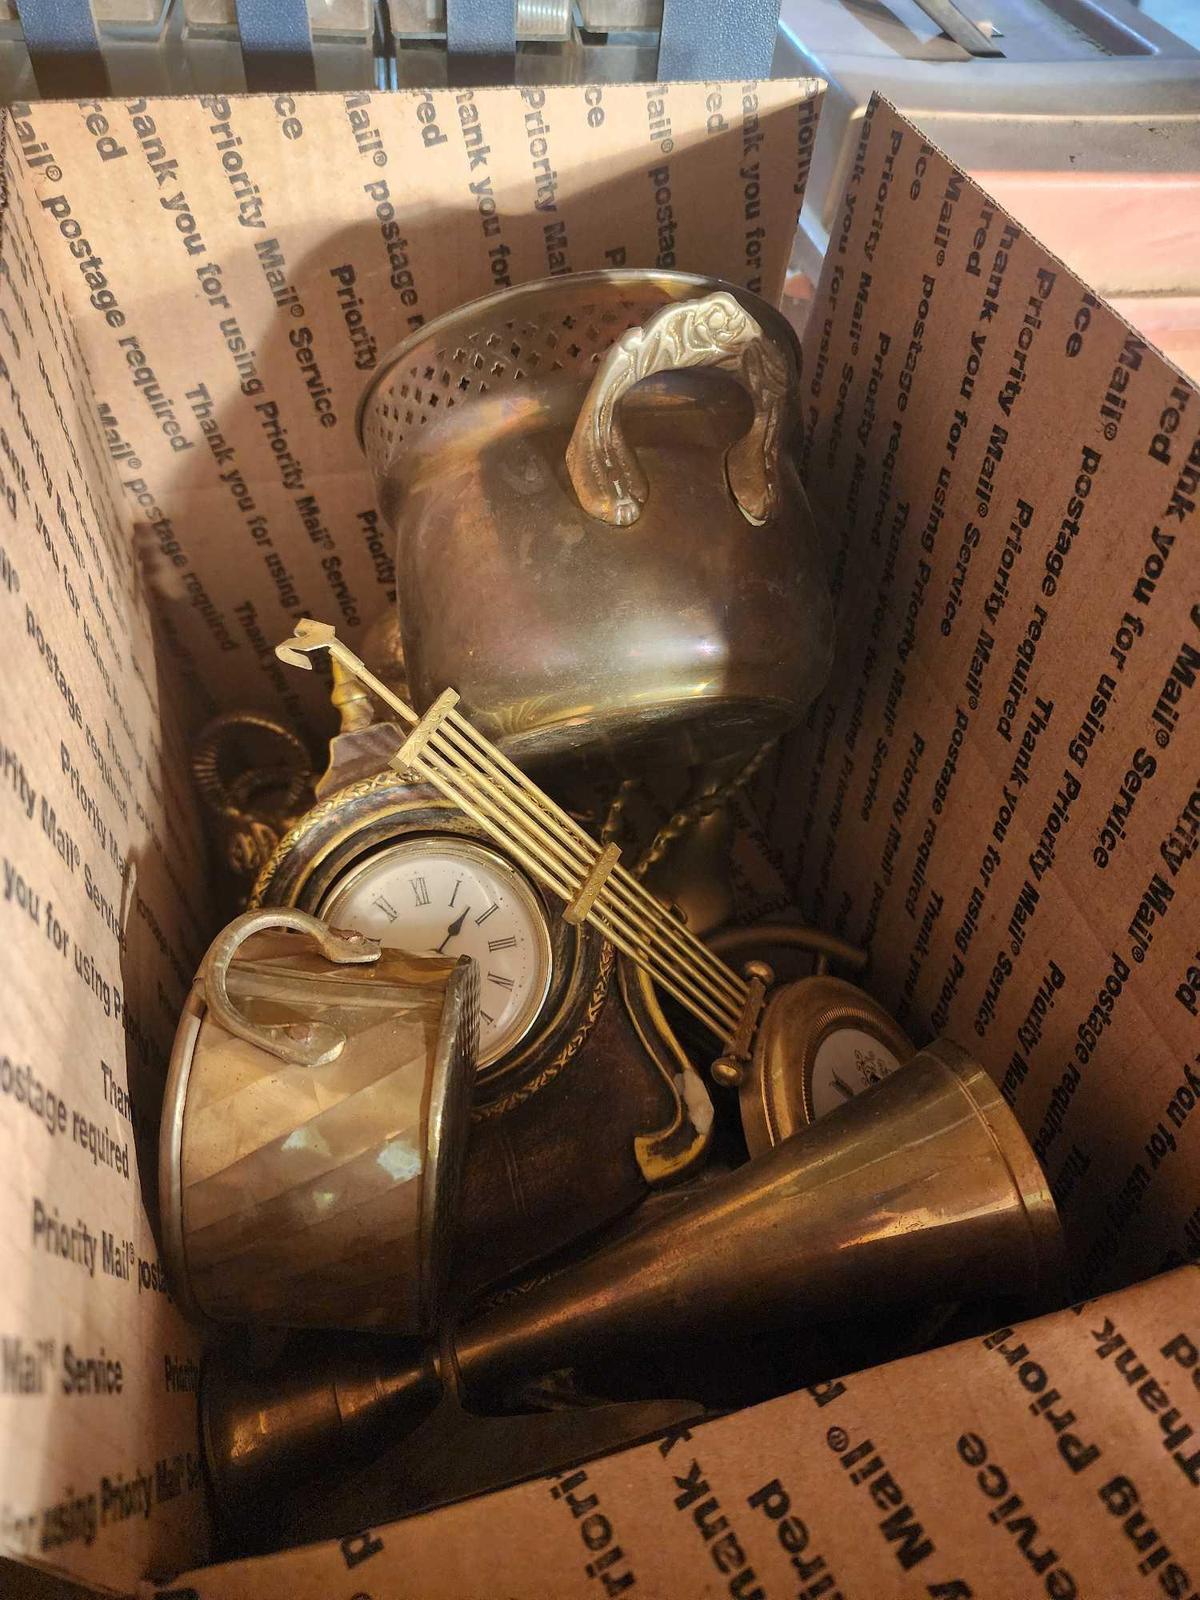 Miscellaneous brass items. Used.